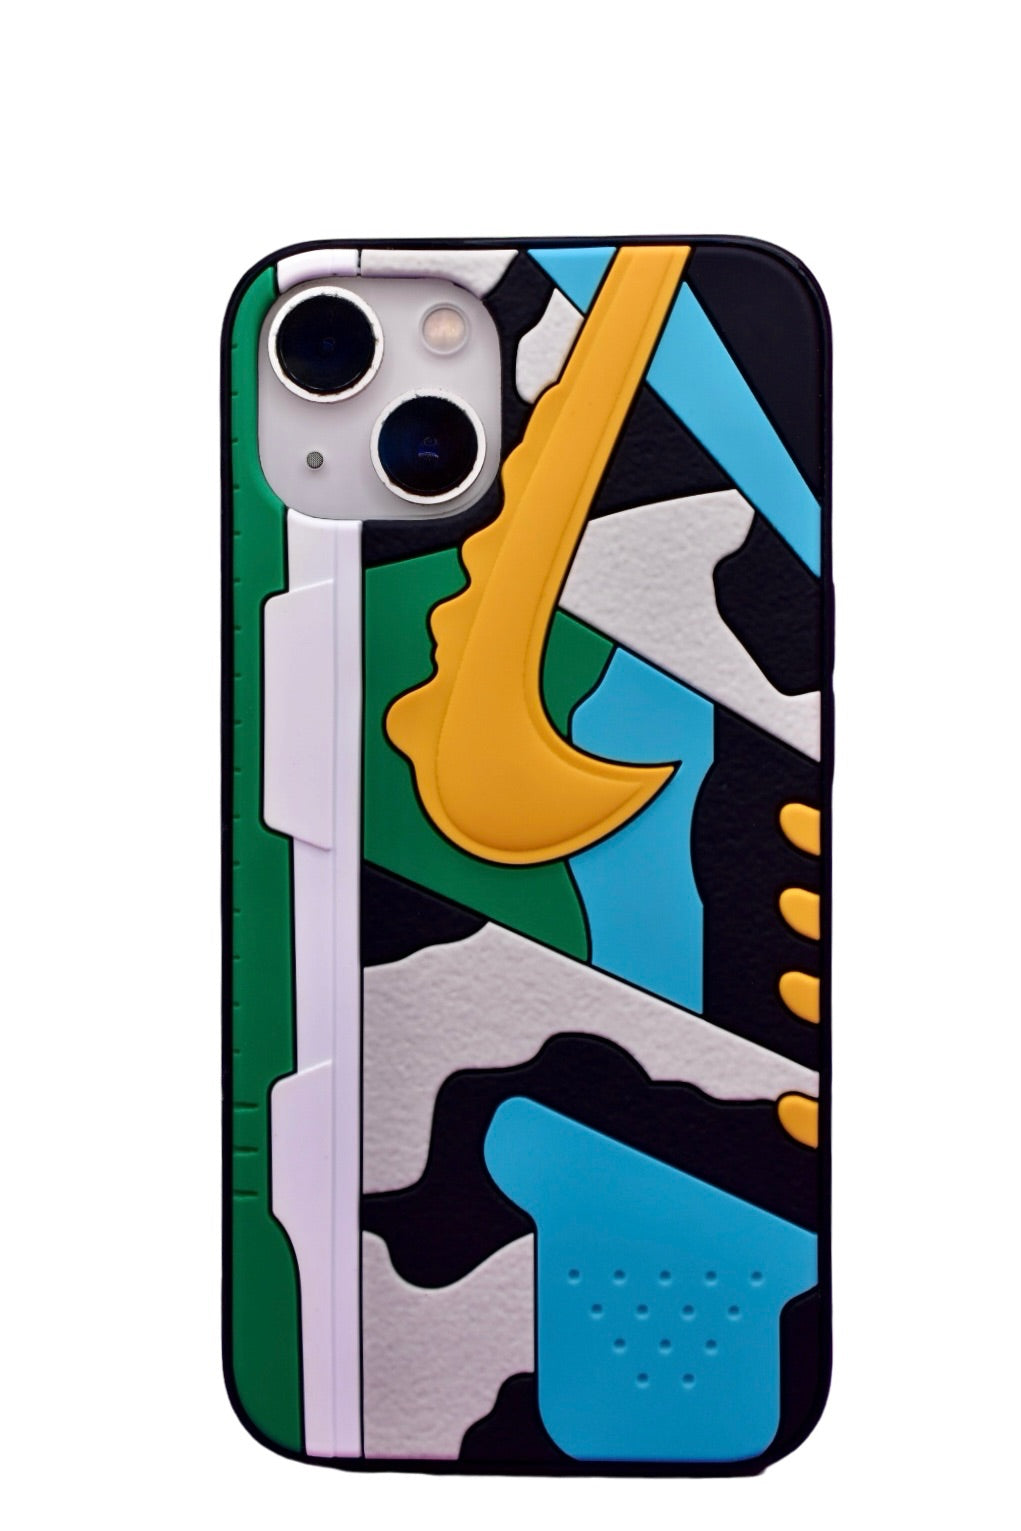 iPhone Case "Ben and Jerry"